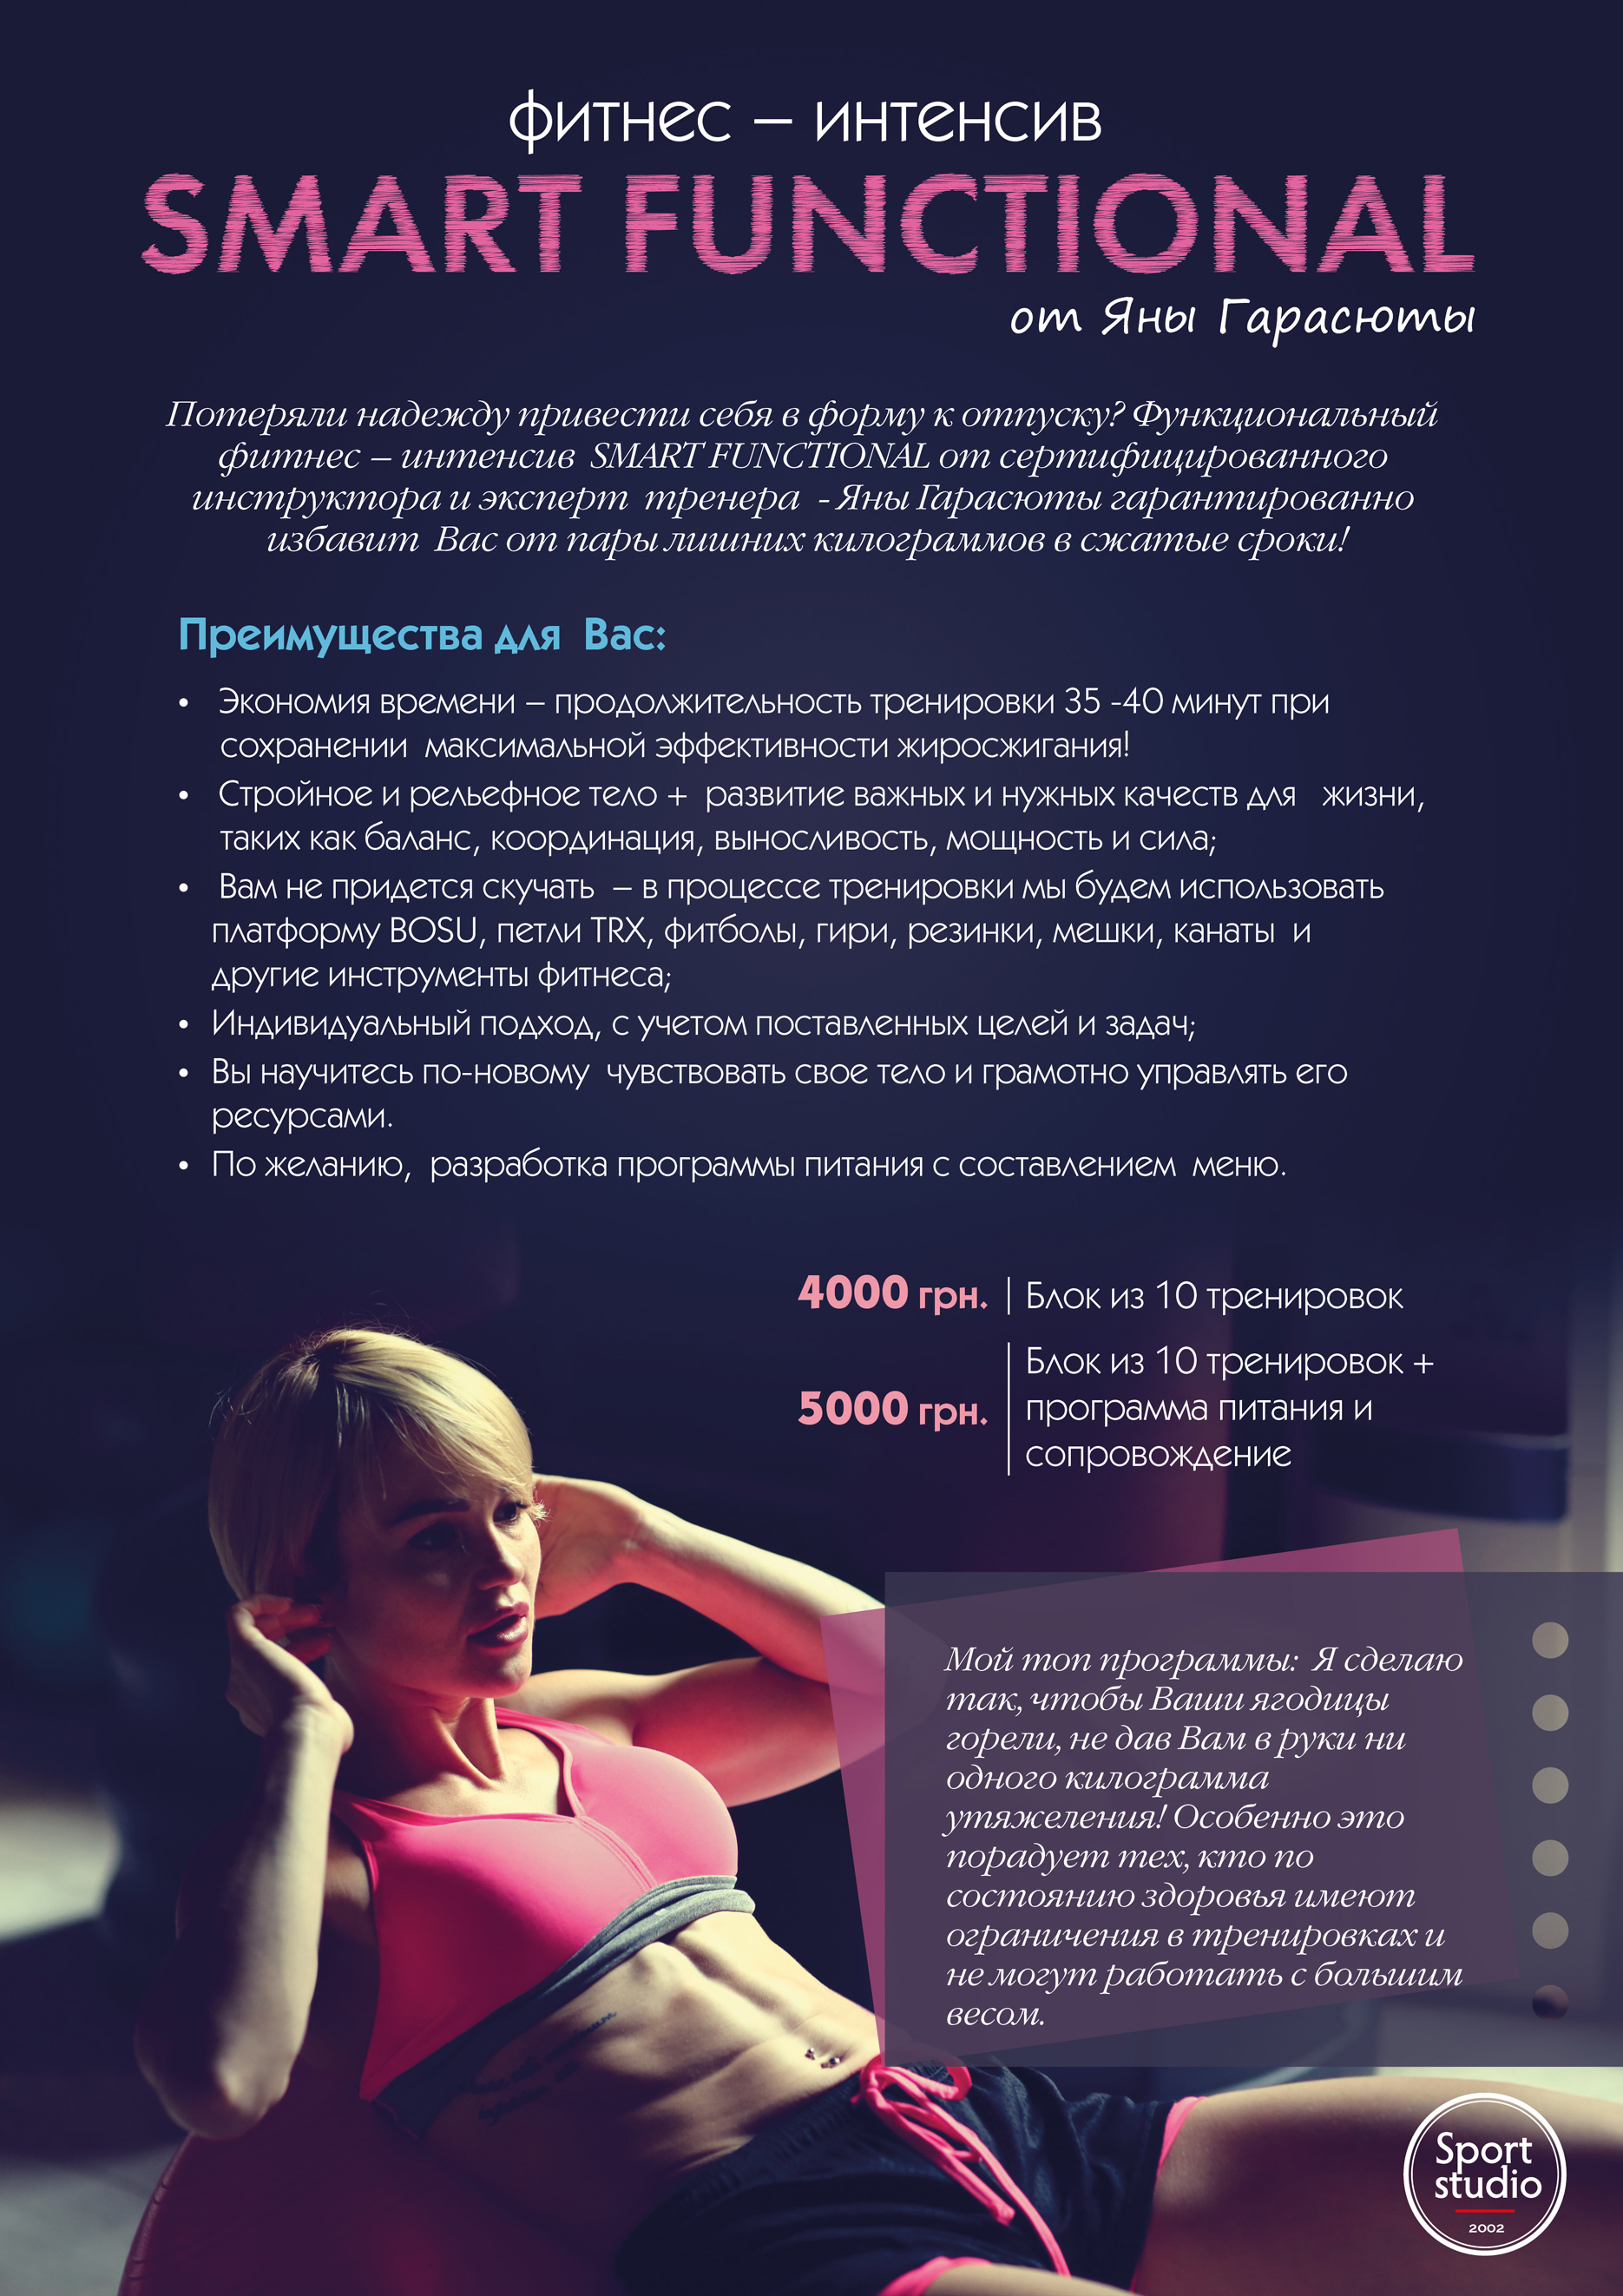 Functional fitness training SMART FUNCTIONAL from a certified instructor and expert trainer Yana Garasyuta